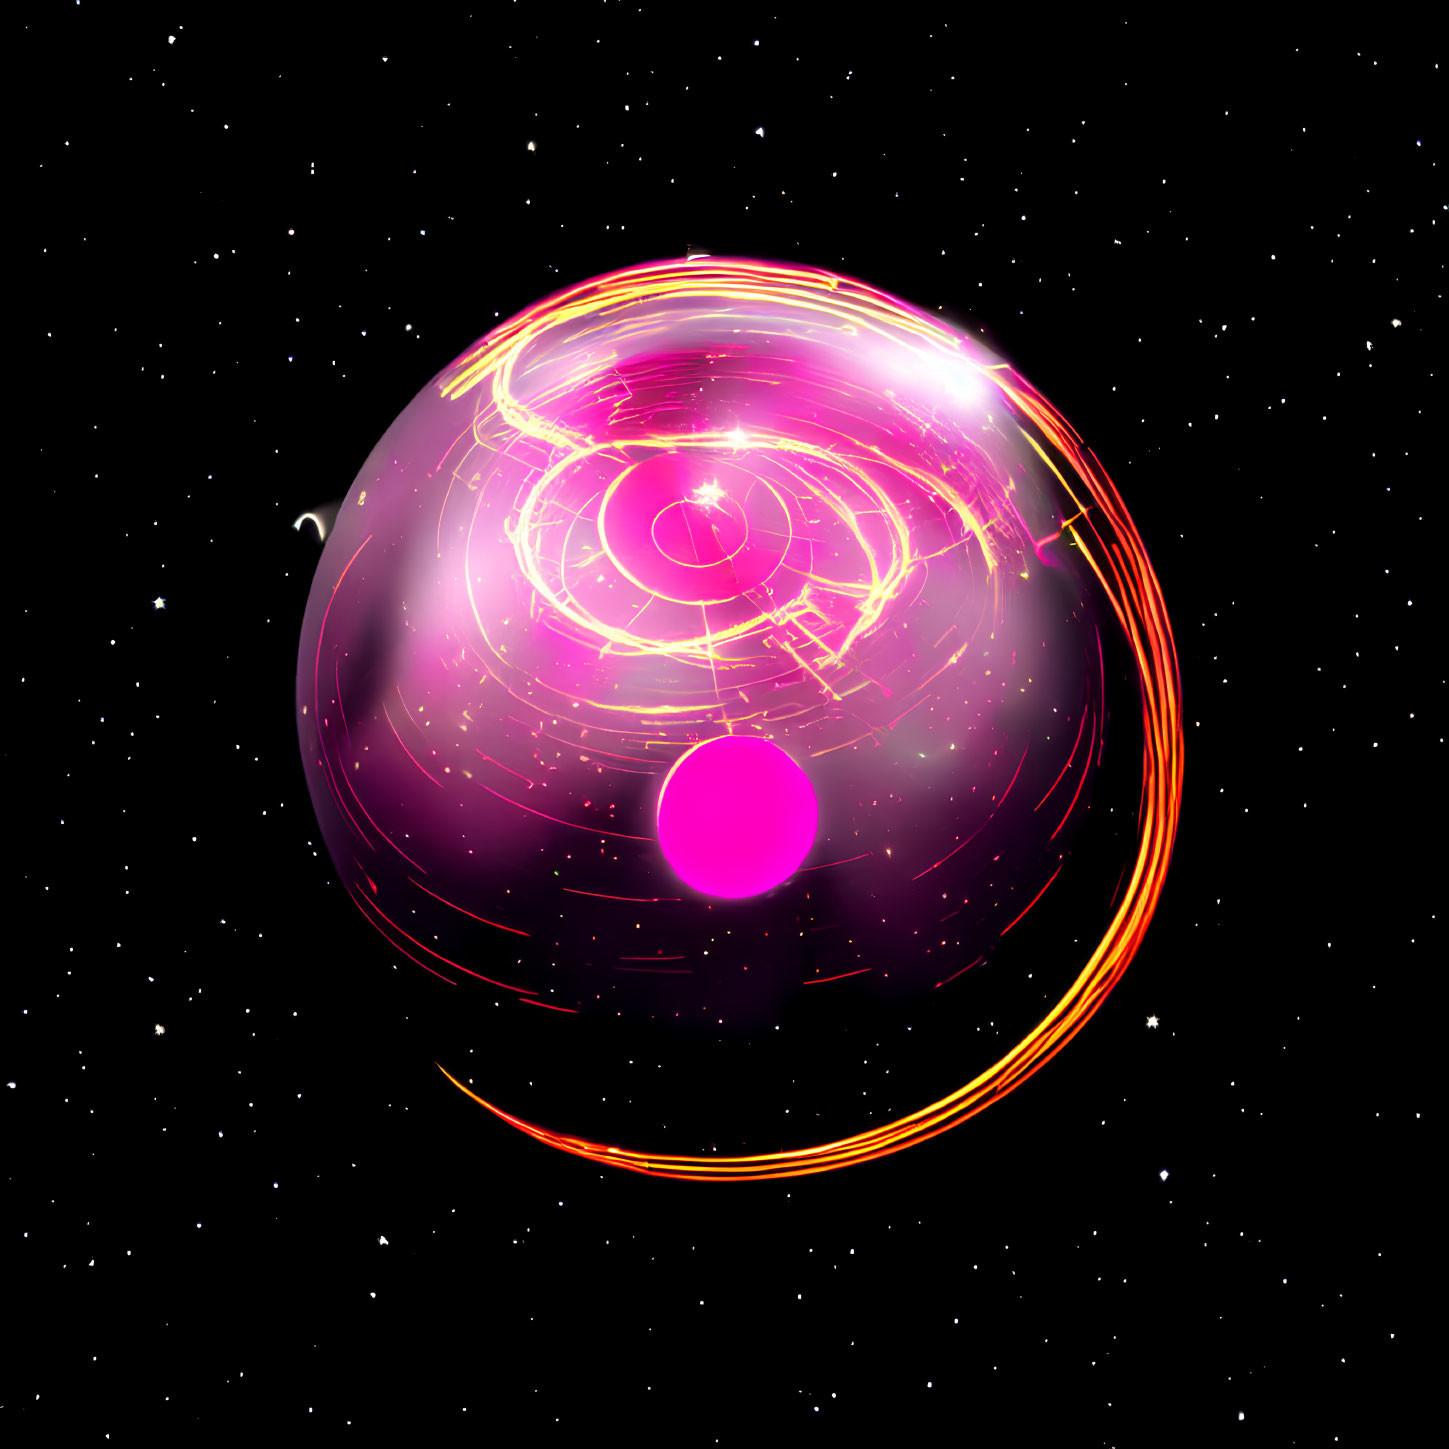 Glowing pink sphere with luminous rings in starry space background